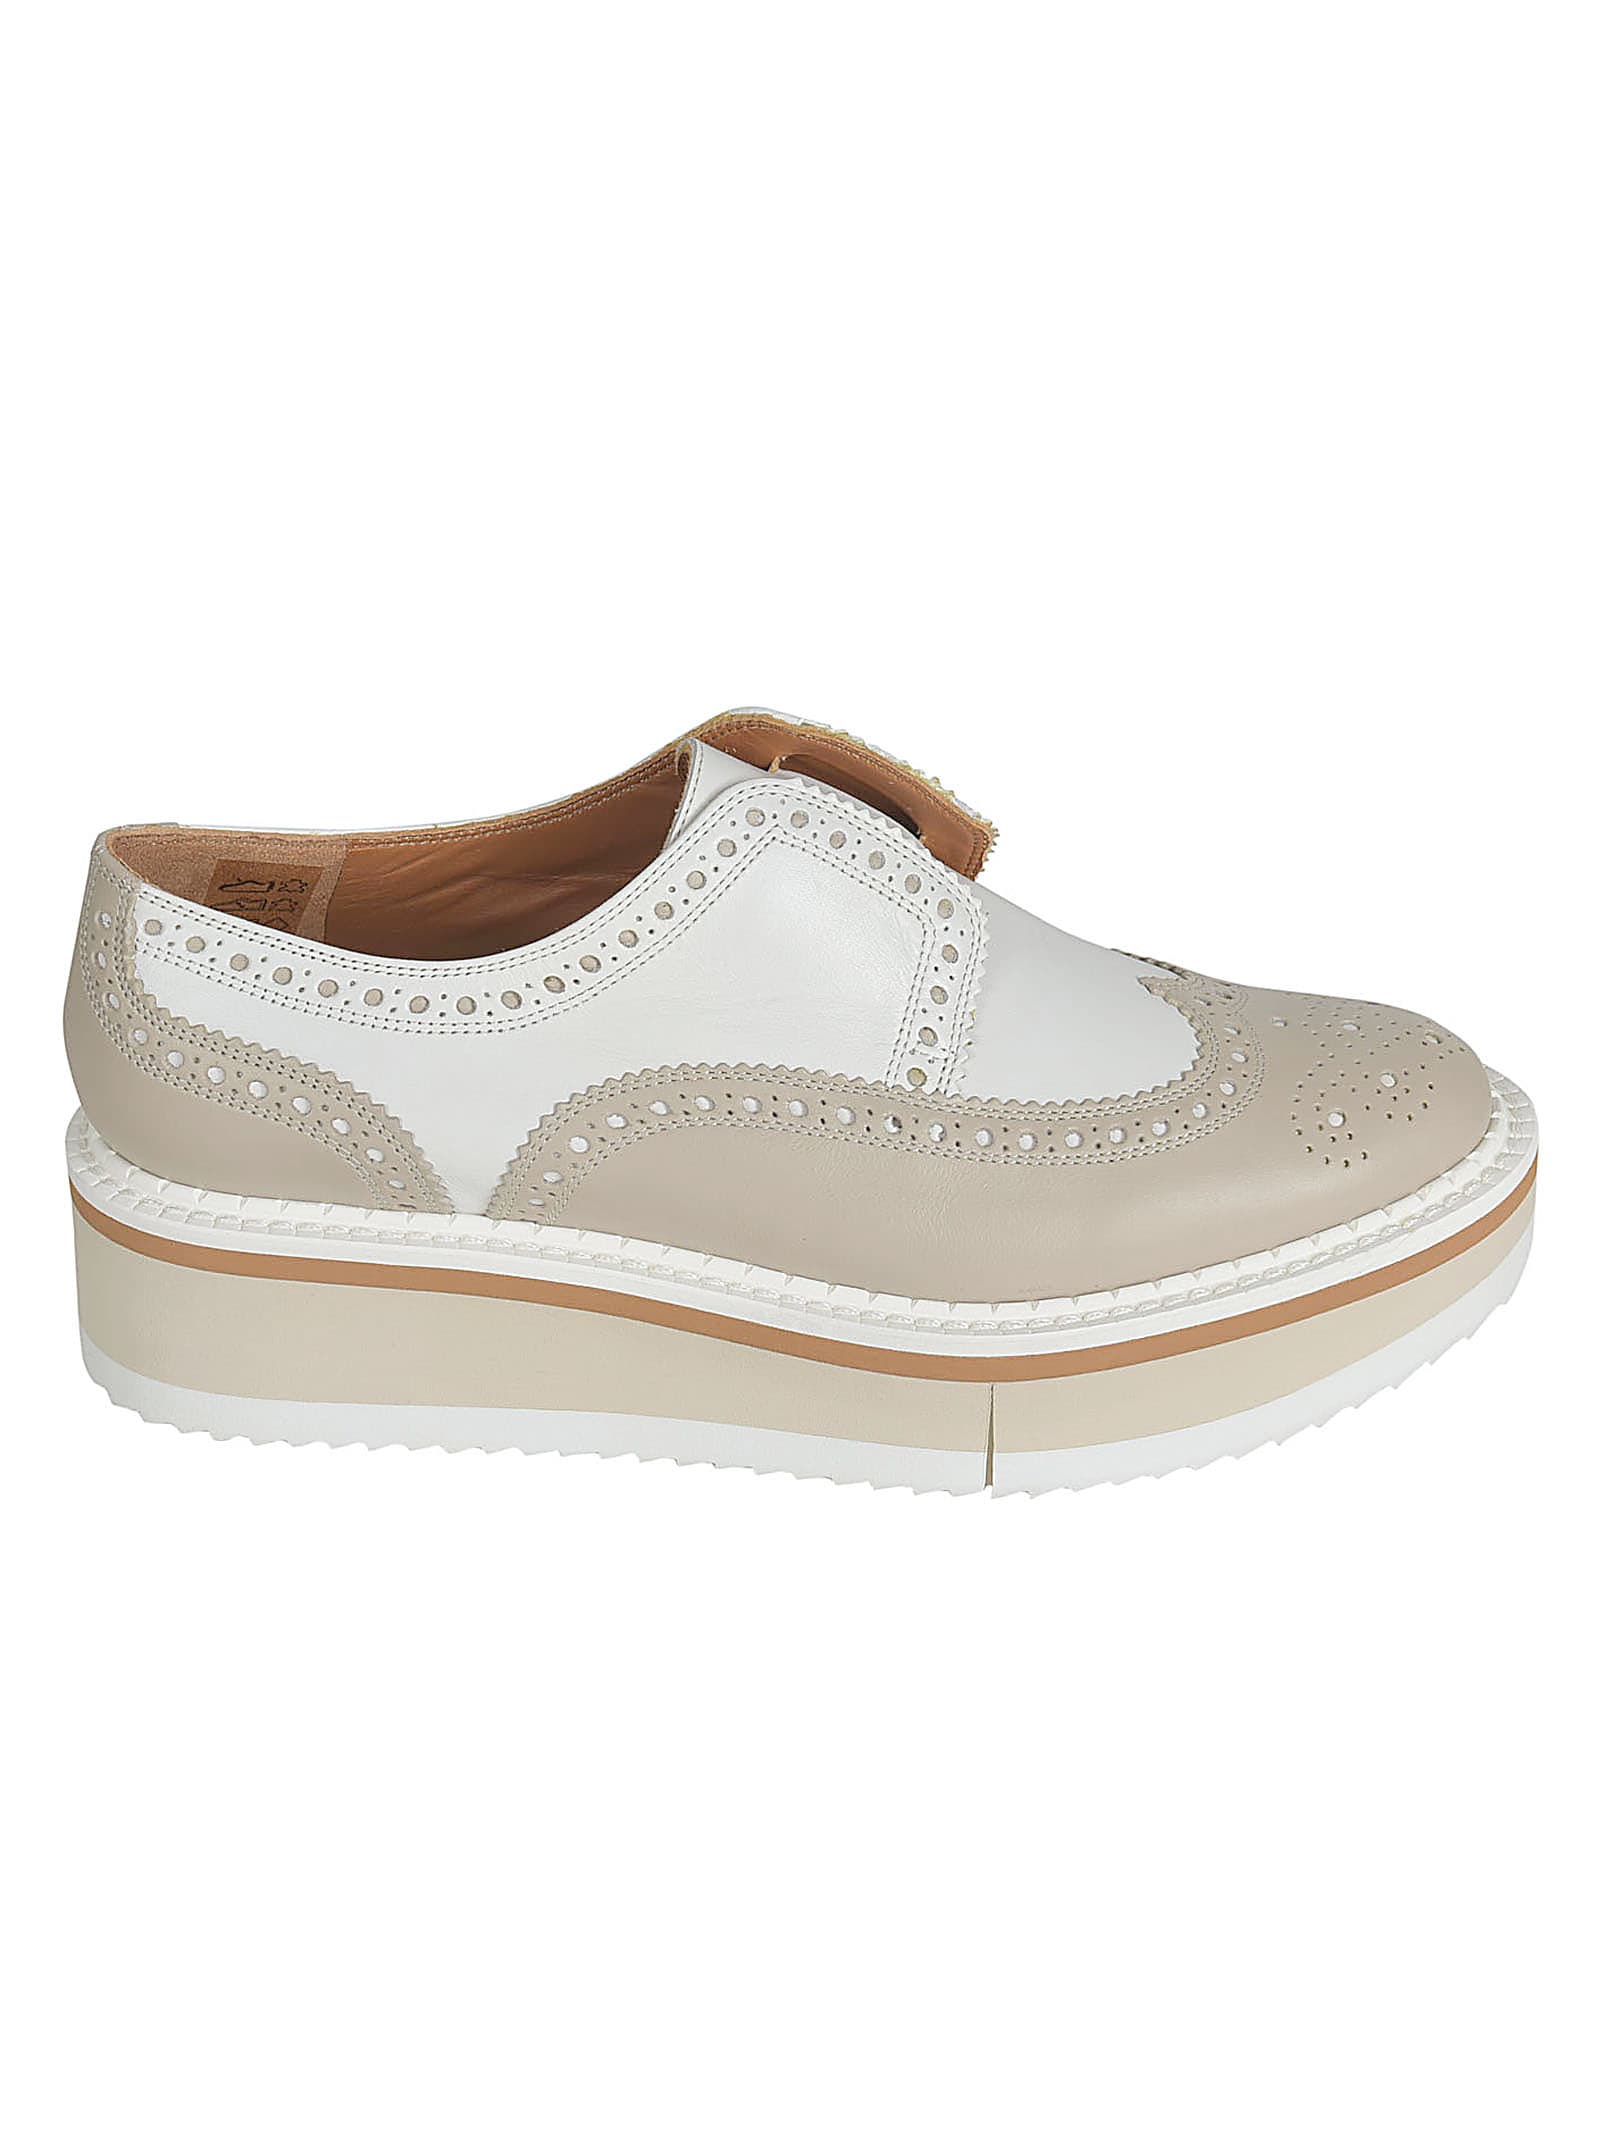 Clergerie Becka Wedge Oxford Shoes